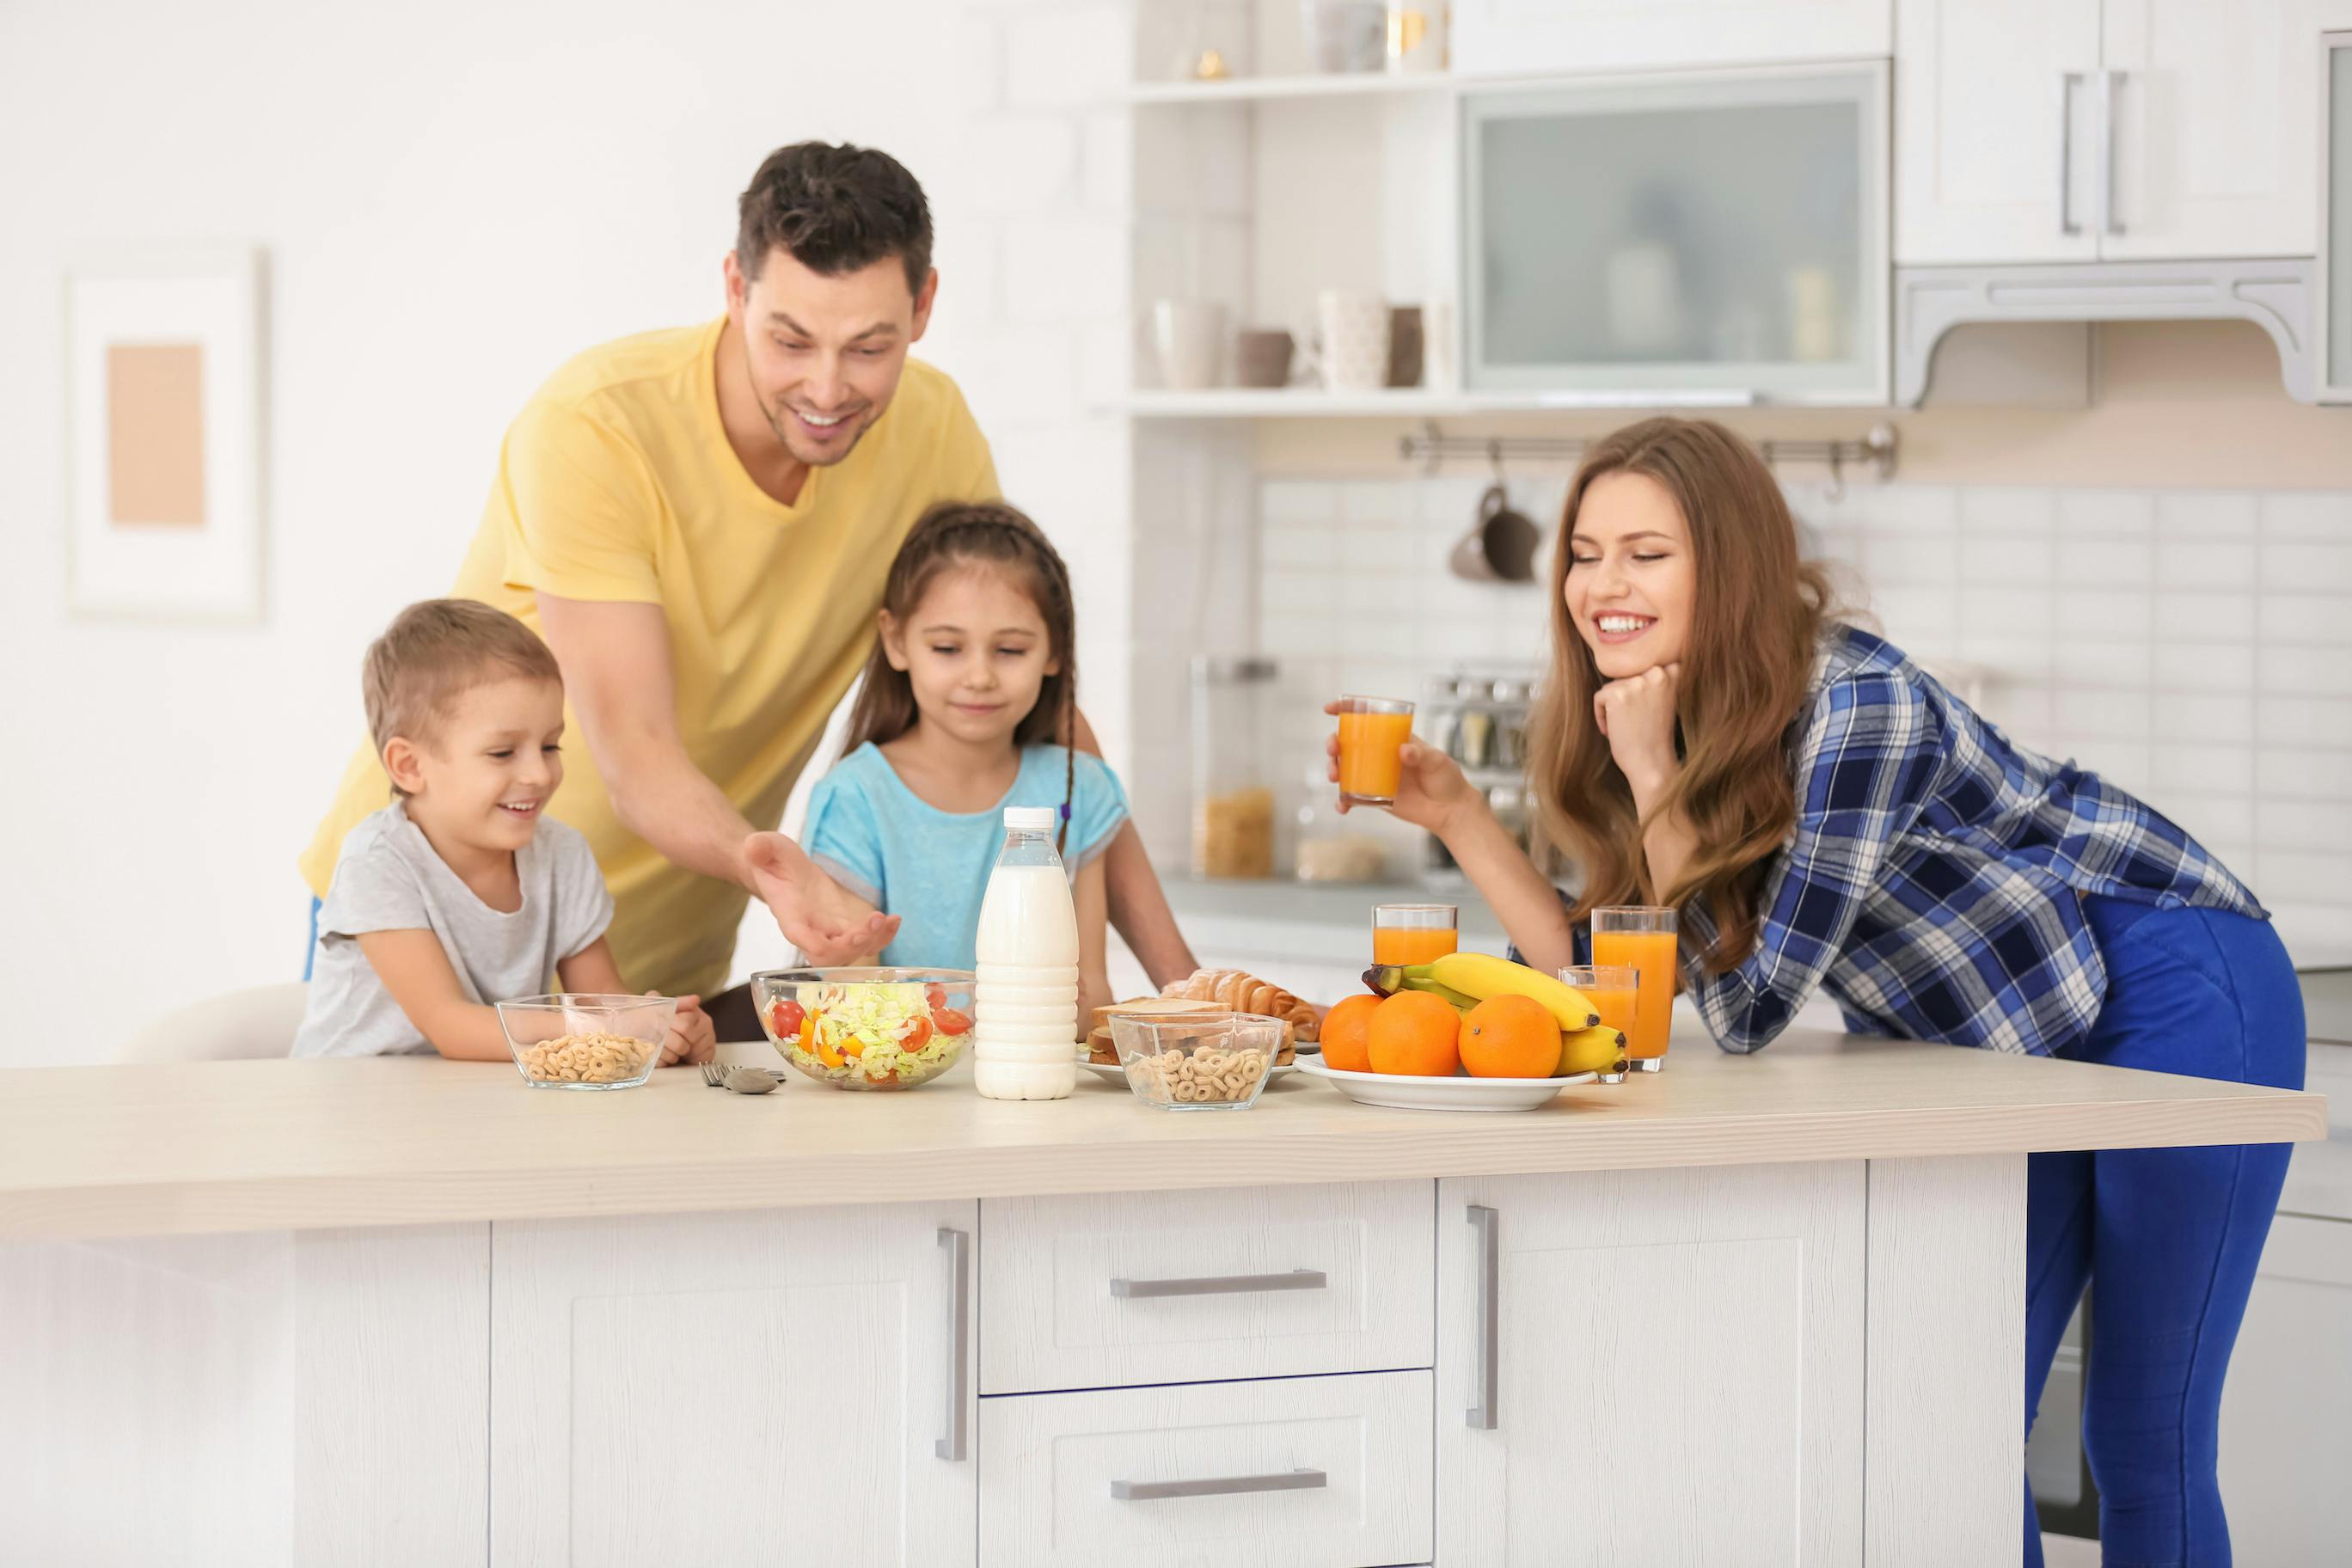 Family with a healthy lifestyle who are a good fit for Medical Cost Sharing.